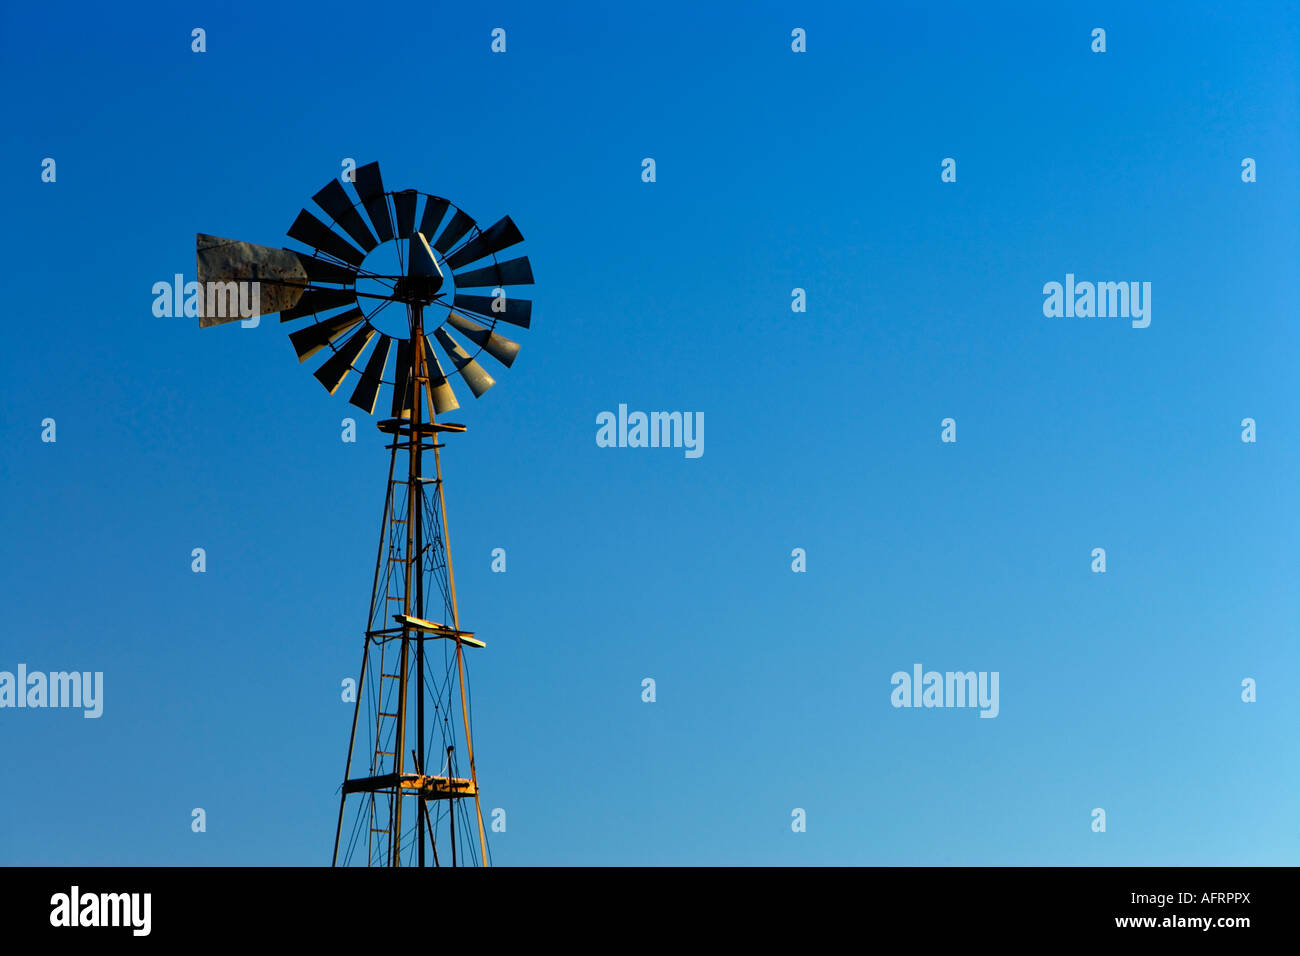 Agricultural windmill against a blue sky. Stock Photo